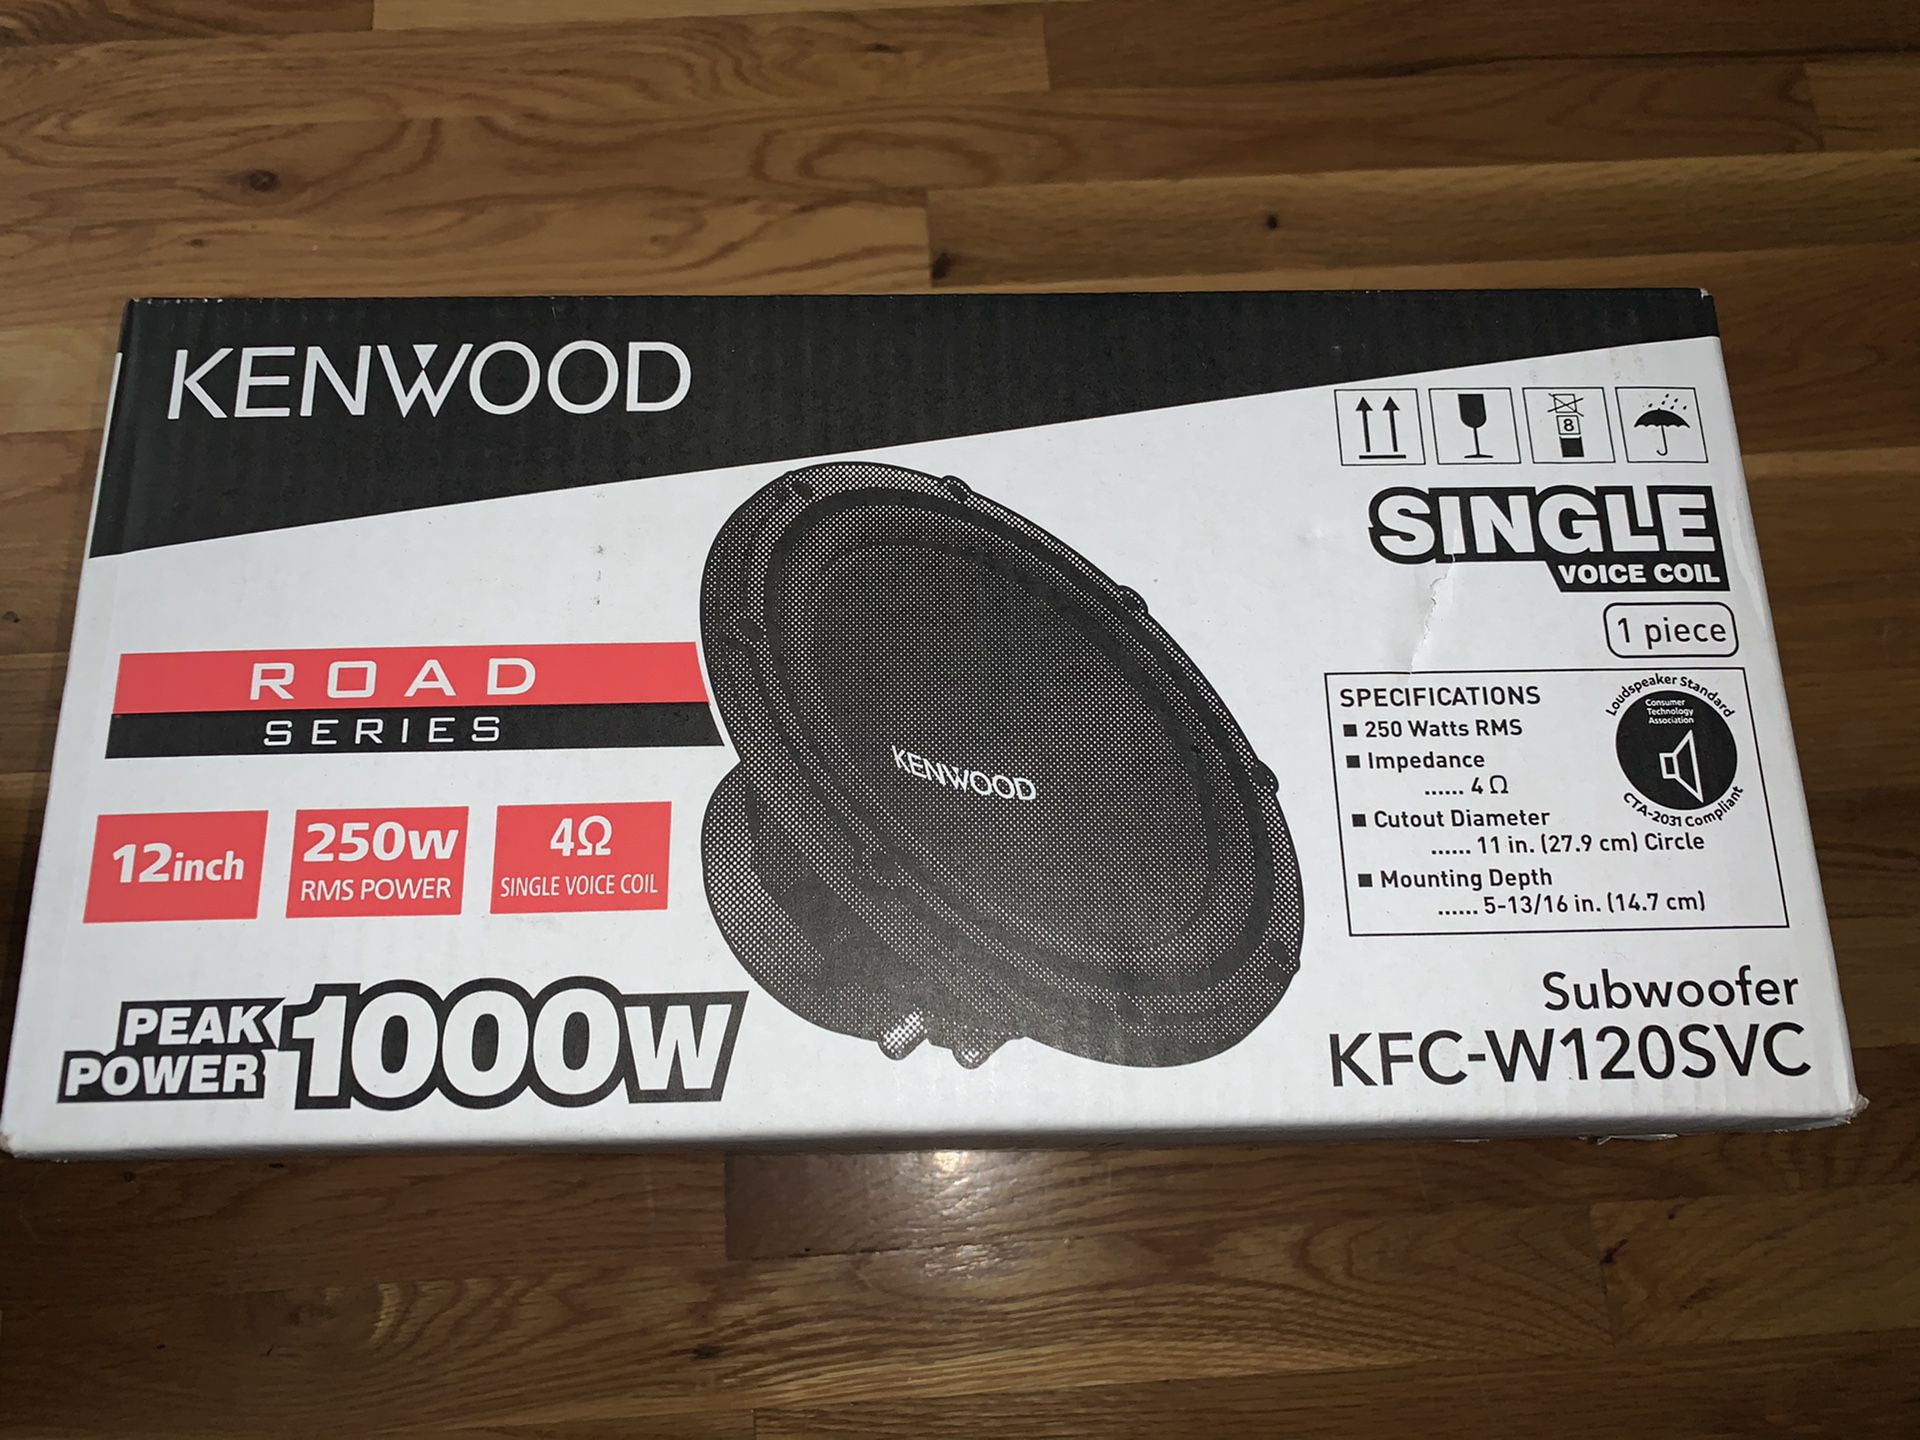 Kenwood - Road series subwoofers (2 of them)